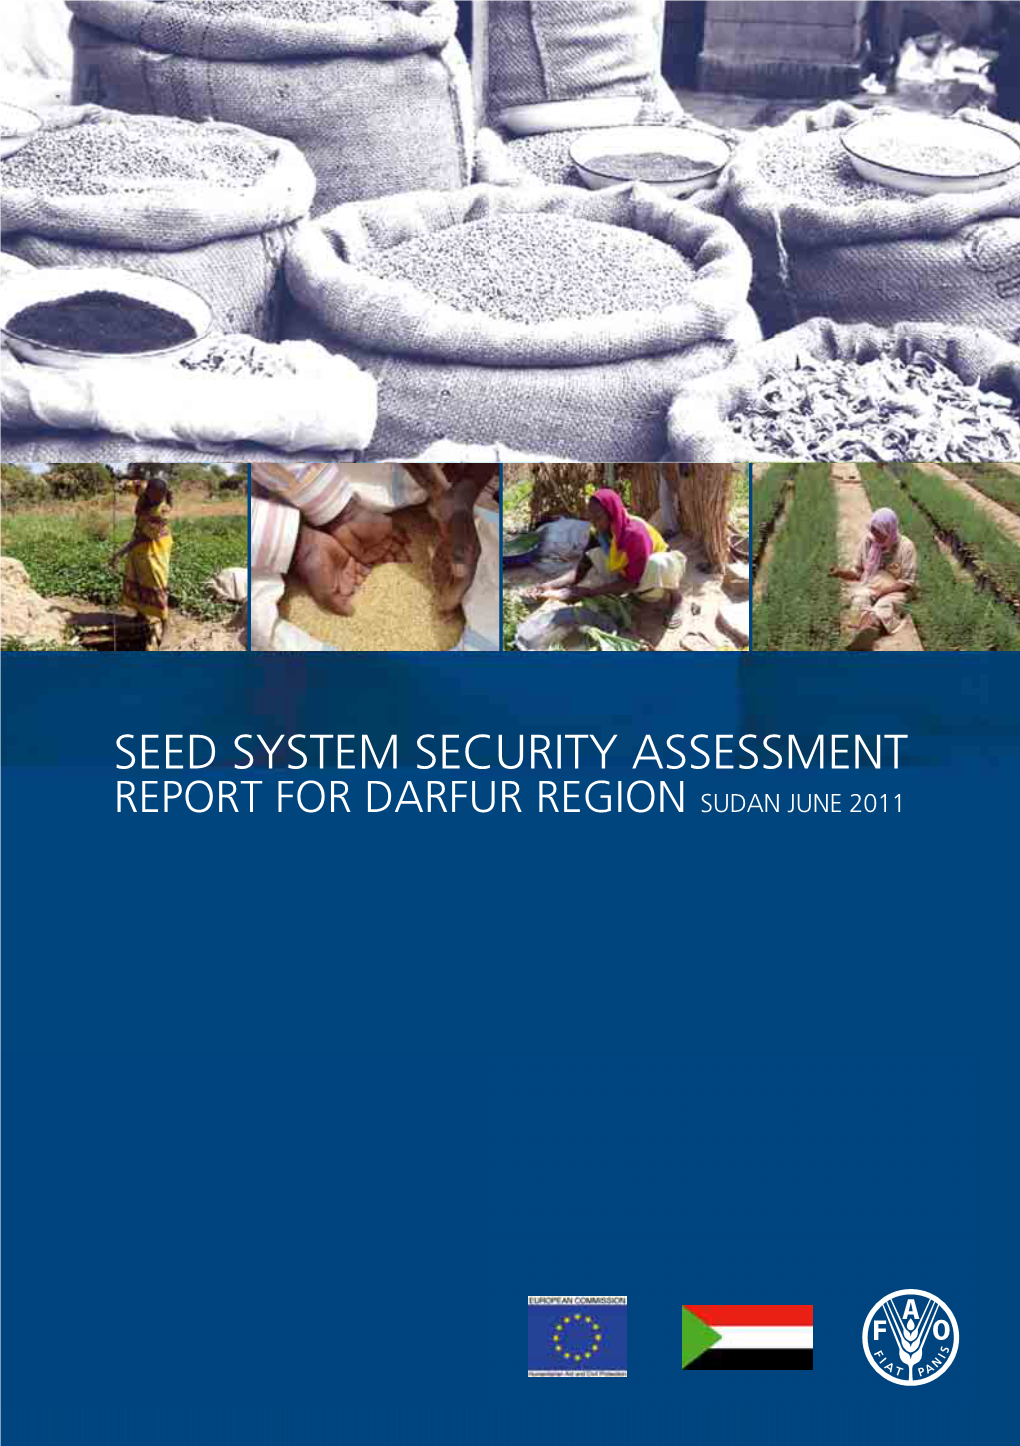 SEED SYSTEM SECURITY ASSESSMENT REPORT for DARFUR REGION SUDAN JUNE 2011 Photographs Courtesy Of: Cover: FAO Sudan Field Team - Pg